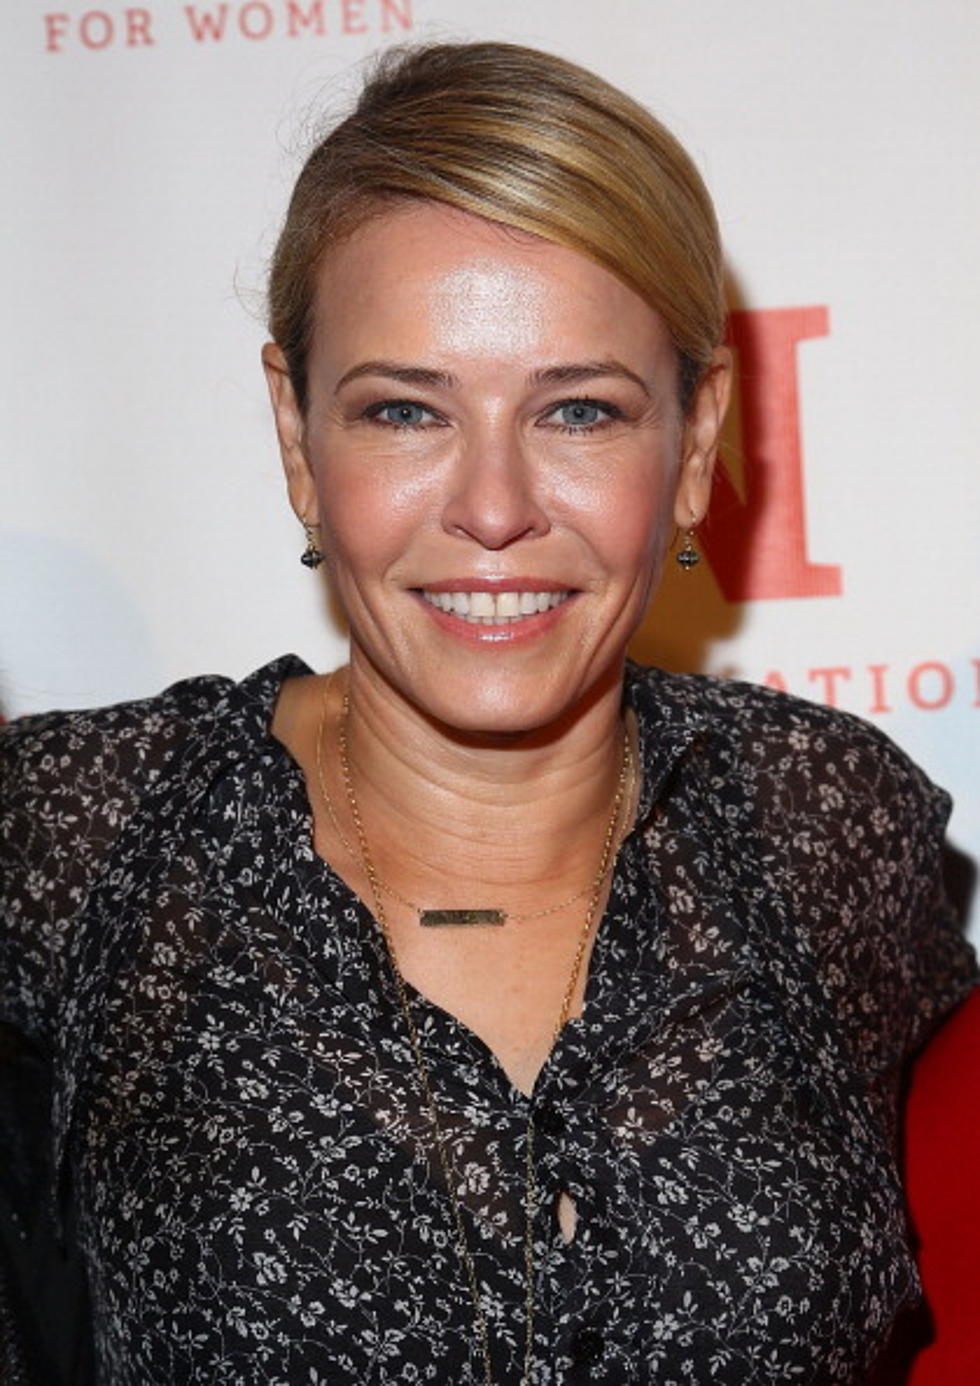 Chelsea Handler to Leave Her Late Night Talk Show